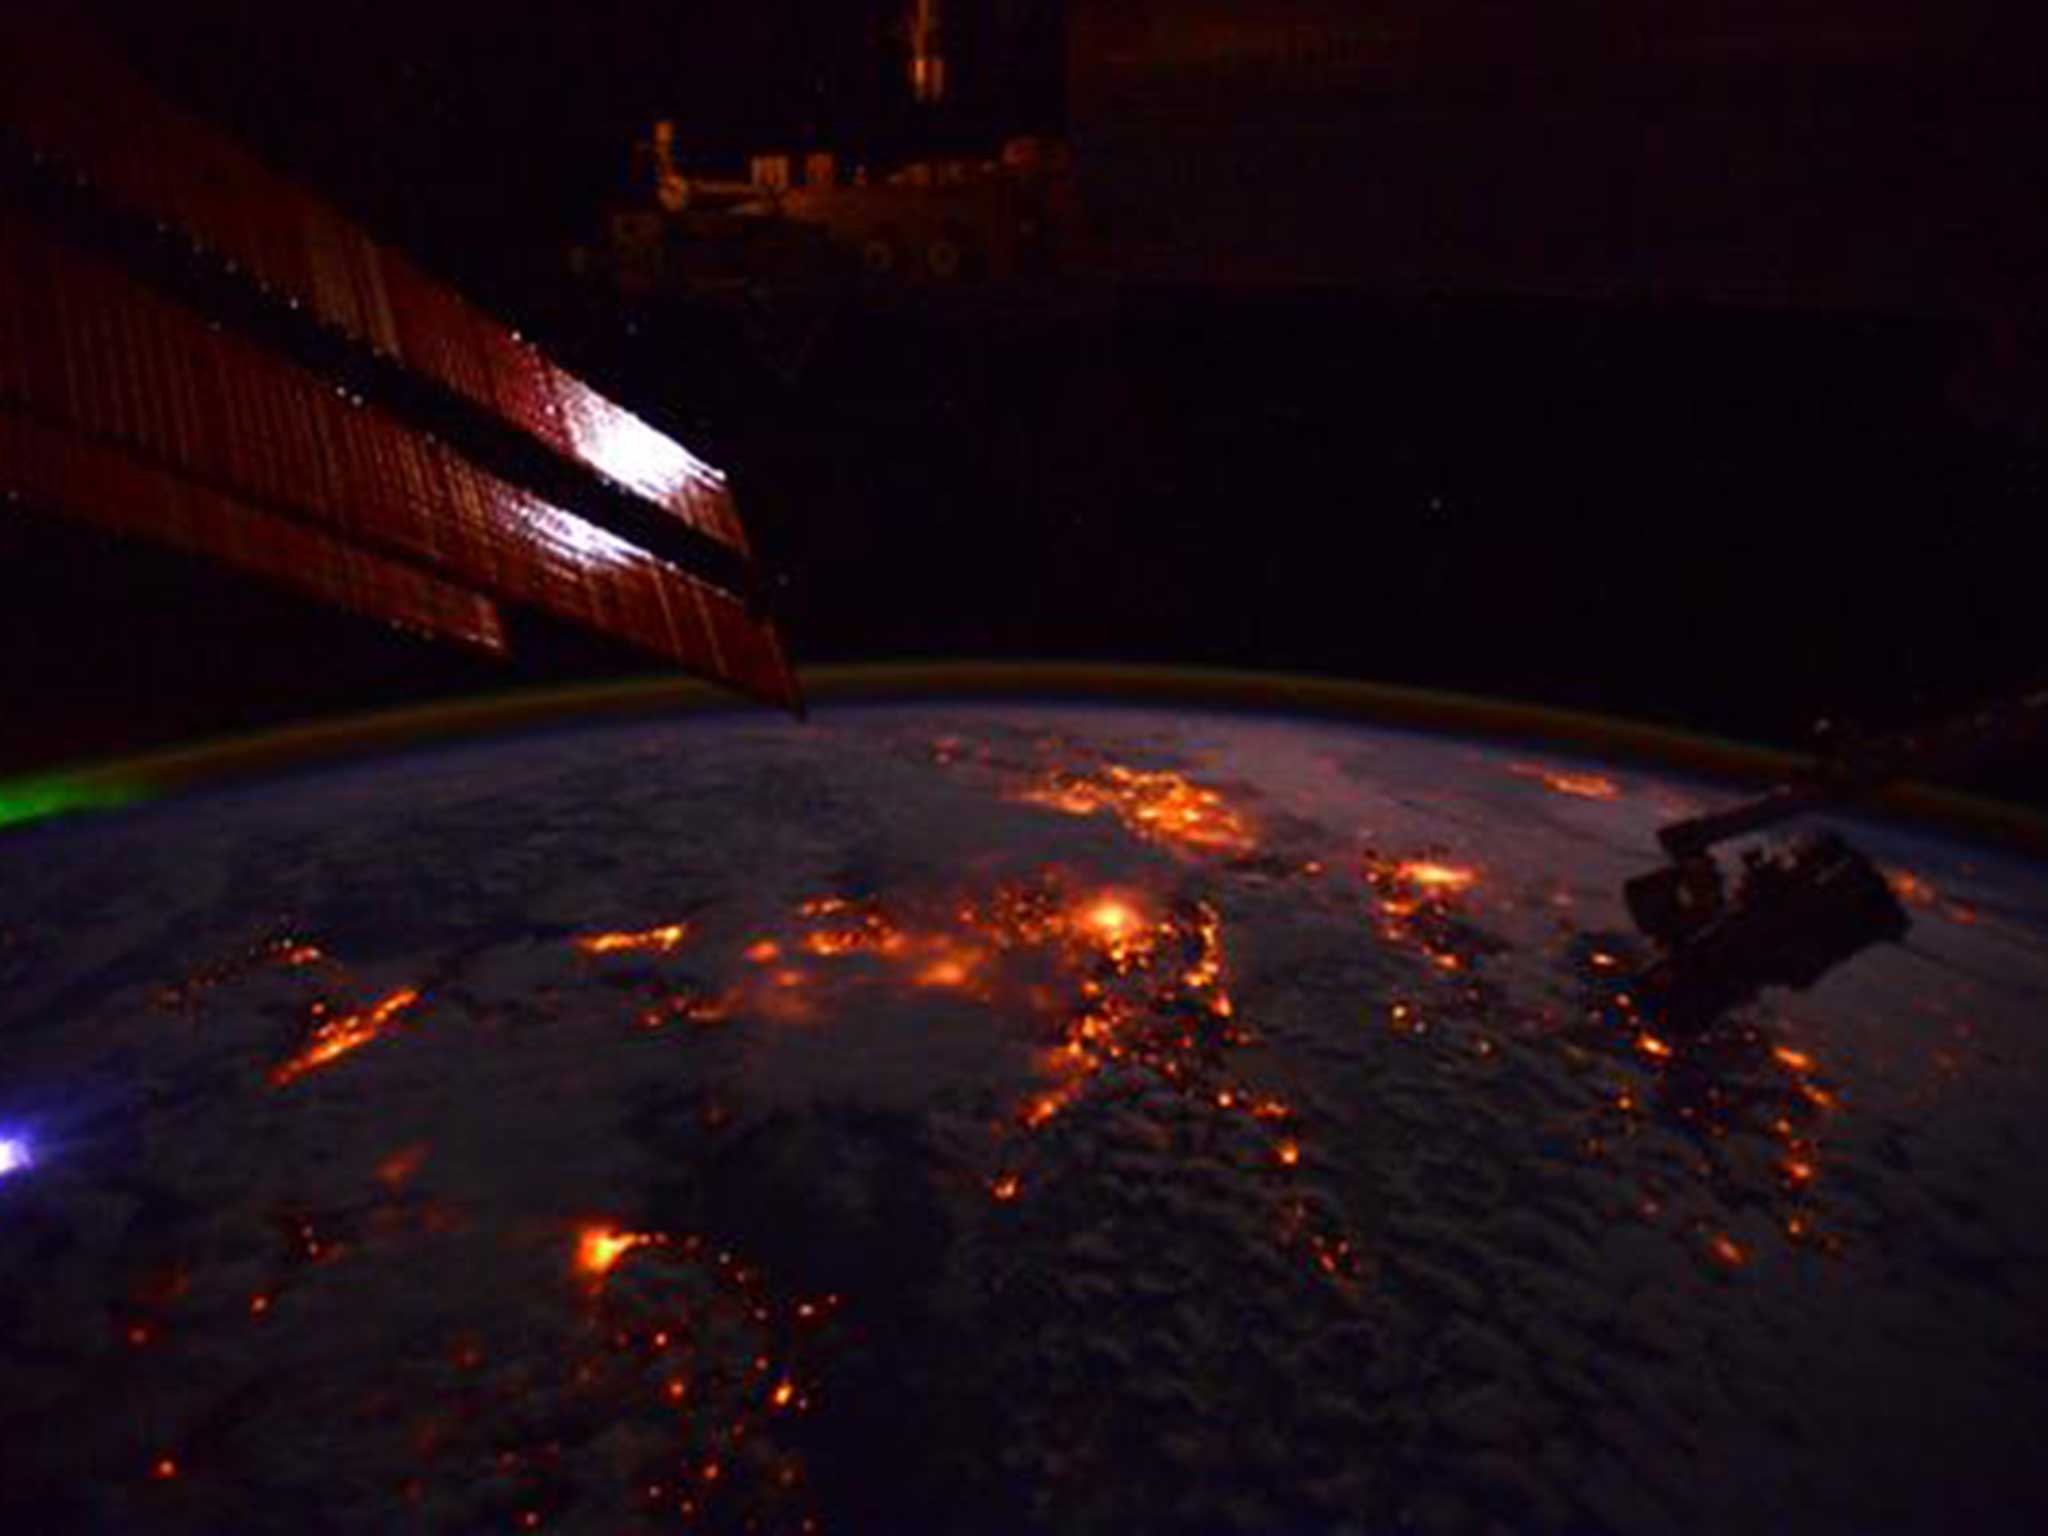 Commander Terry W. Virts' photograph from the ISS